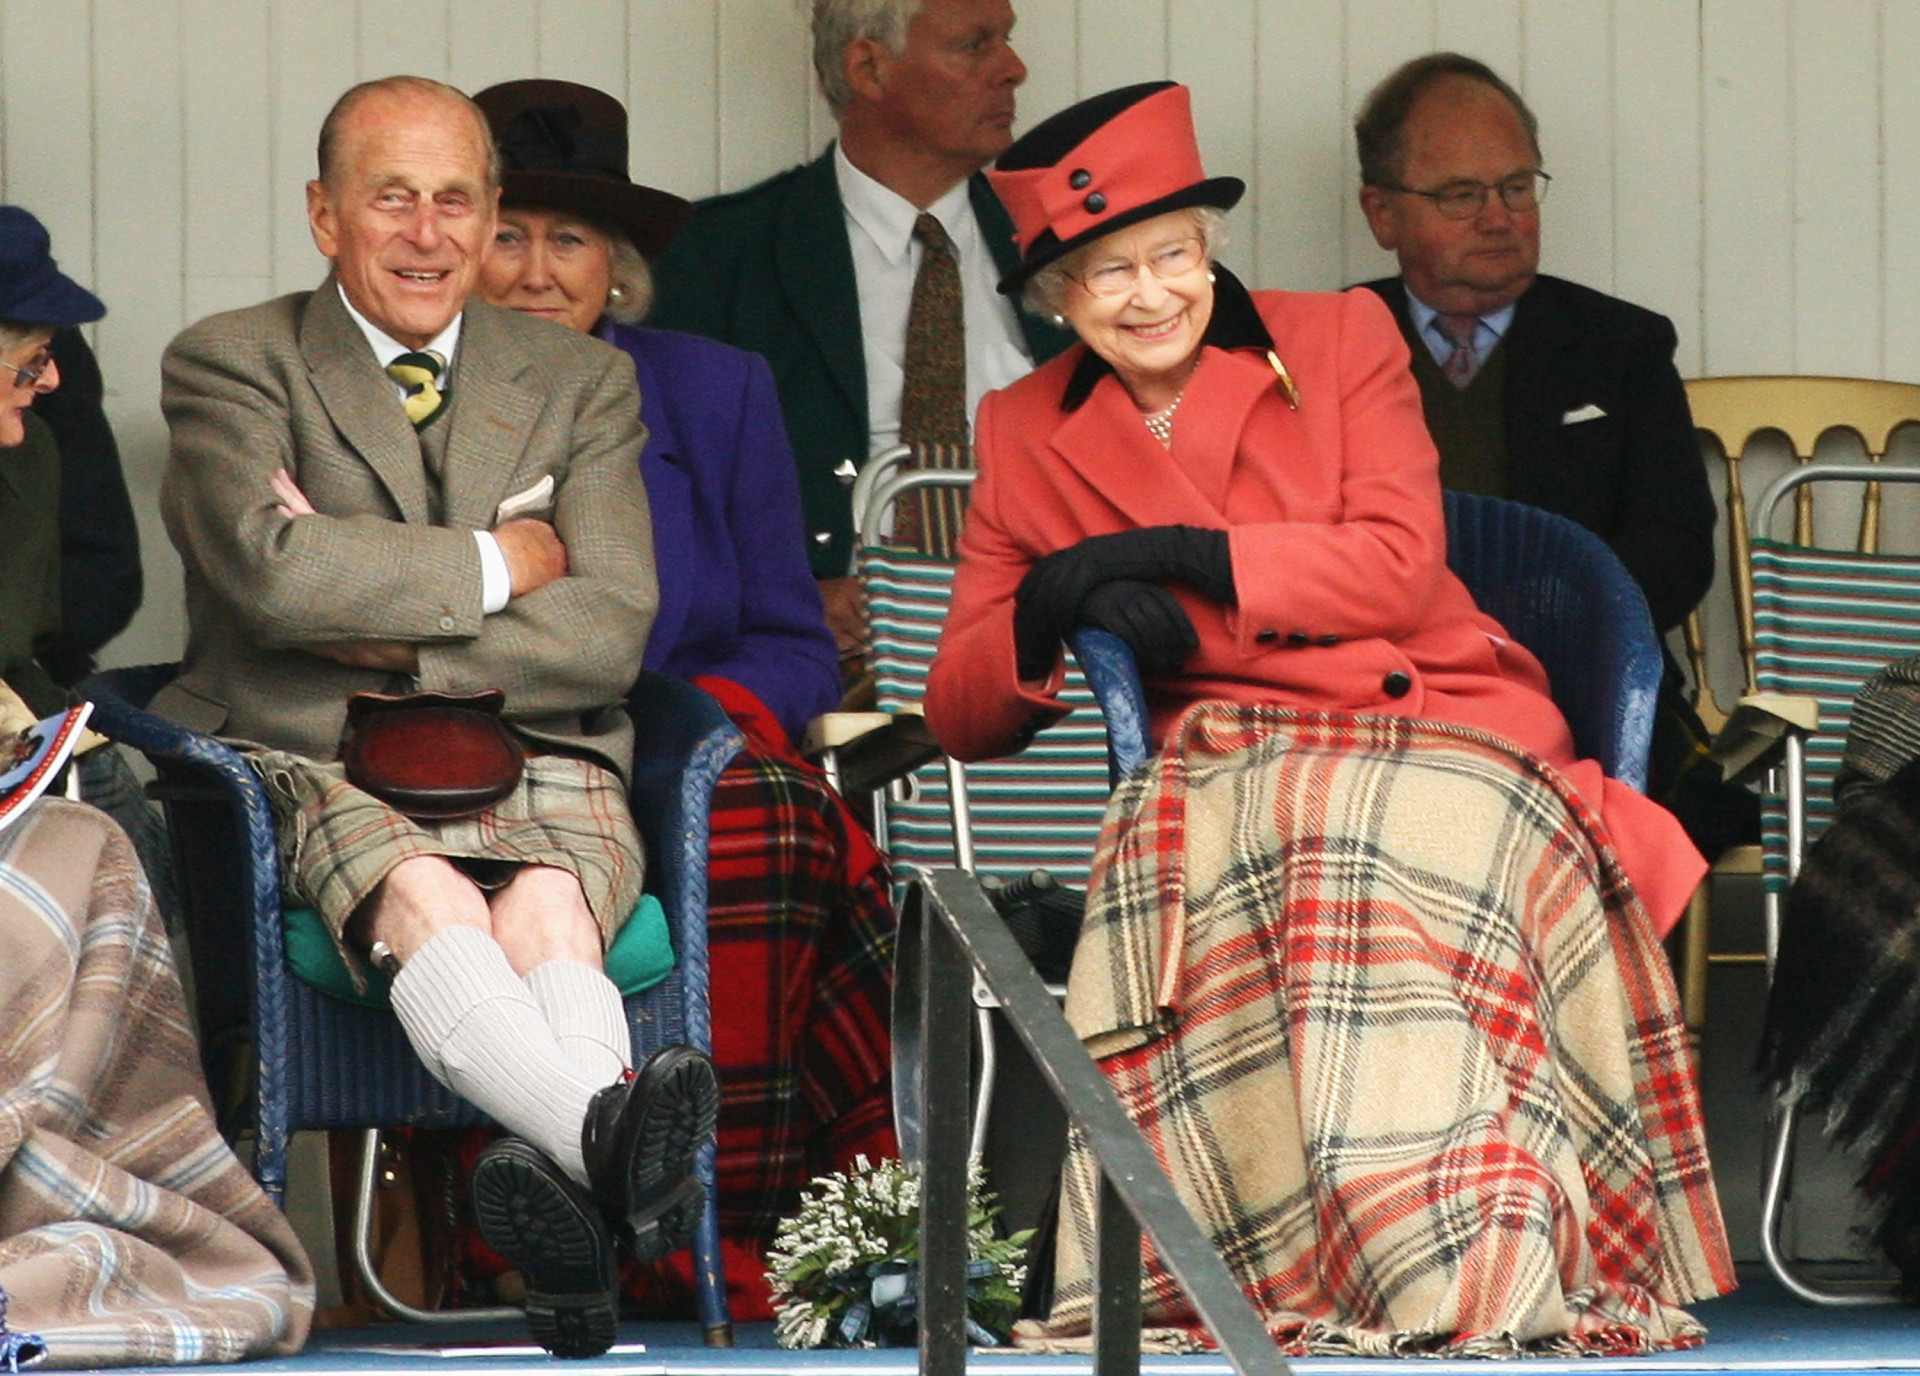 Queen Elizabeth II and Prince Philip laugh as they watch the games during the Annual Braemar Highland Gathering.<p><a href="https://www.msn.com/en-za/community/channel/vid-7xx8mnucu55yw63we9va2gwr7uihbxwc68fxqp25x6tg4ftibpra?cvid=94631541bc0f4f89bfd59158d696ad7e">Follow us and access great exclusive content every day</a></p>